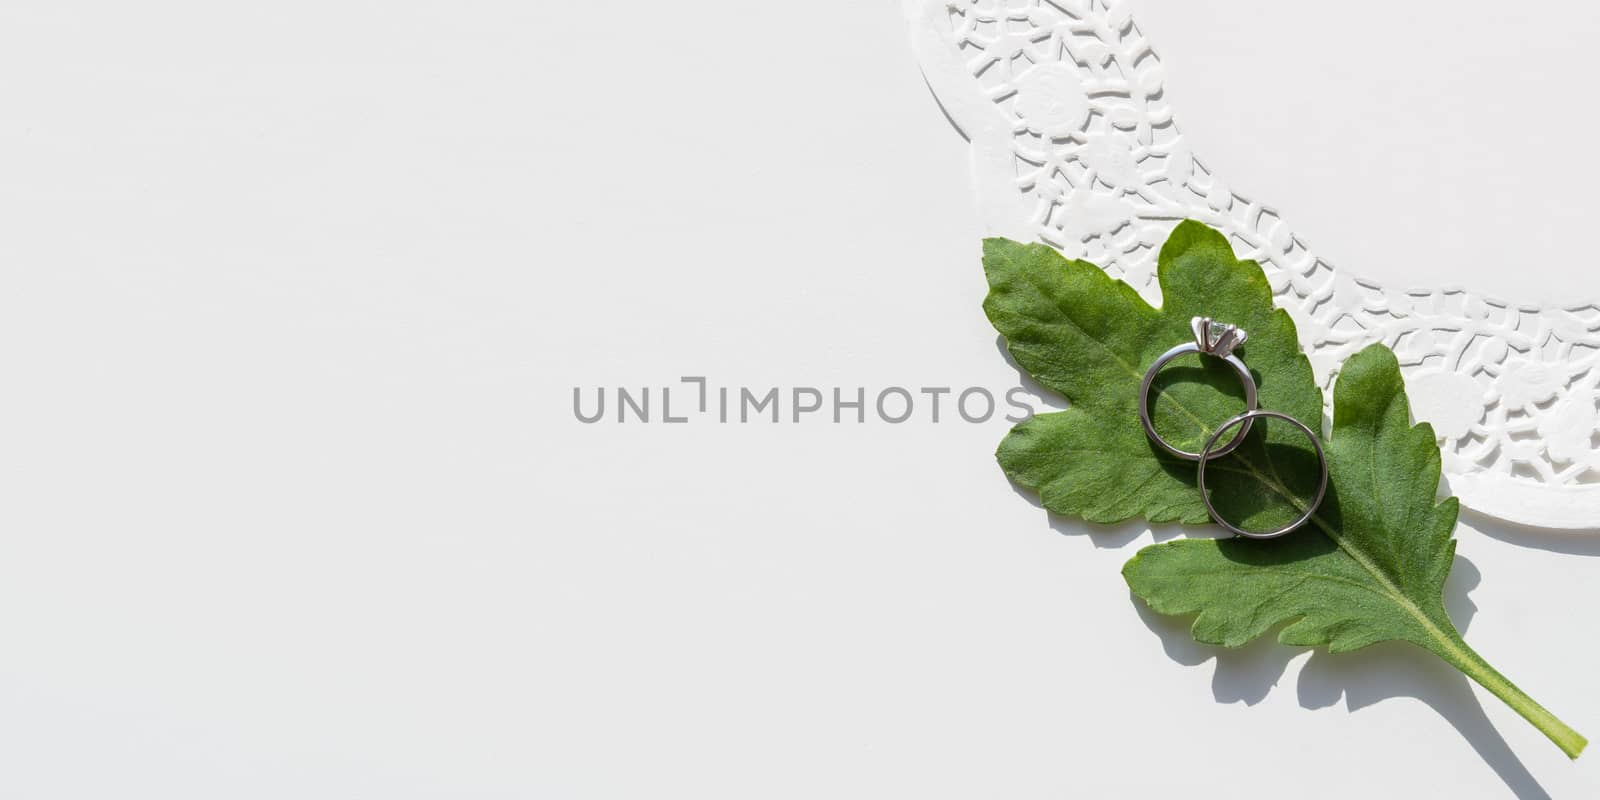 Top view on two wedding rings on green leaf. Plant with traditional jewelry accessories with laces napkin. White background with copy space. by aksenovko